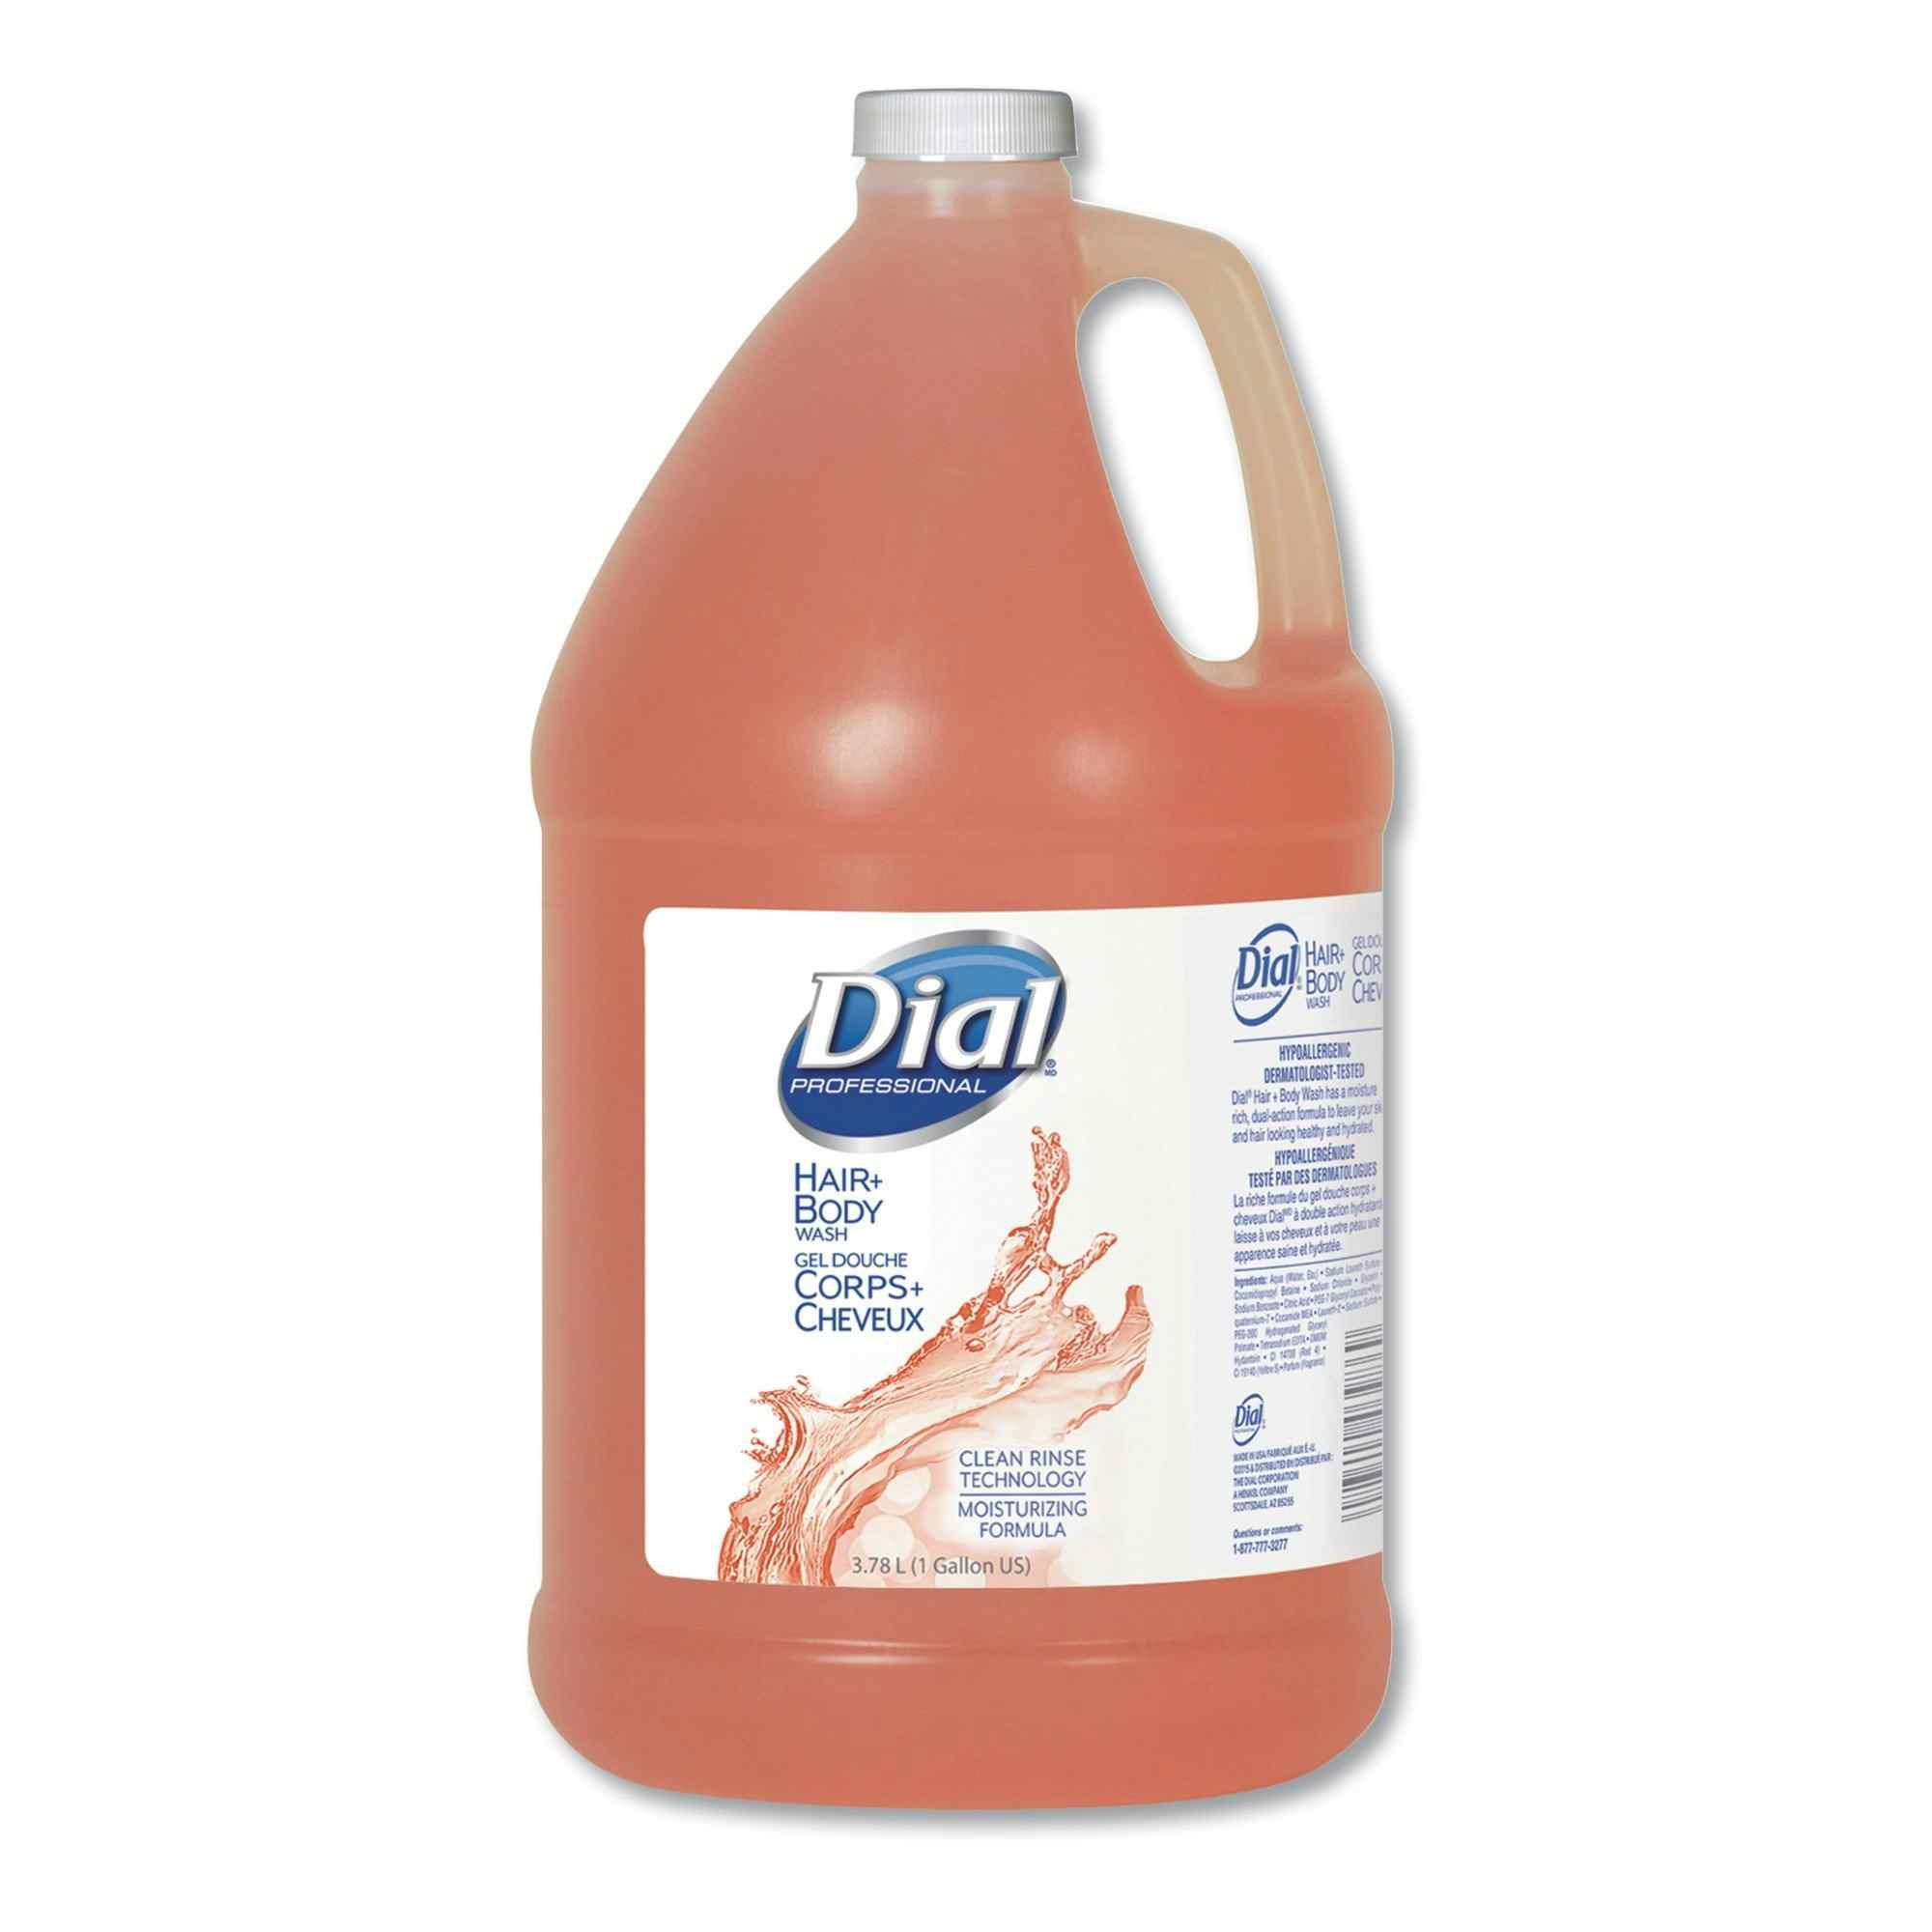 Dial Professional Hair and Body Wash, DIA03986, 1 gal. Jug - Case of 4